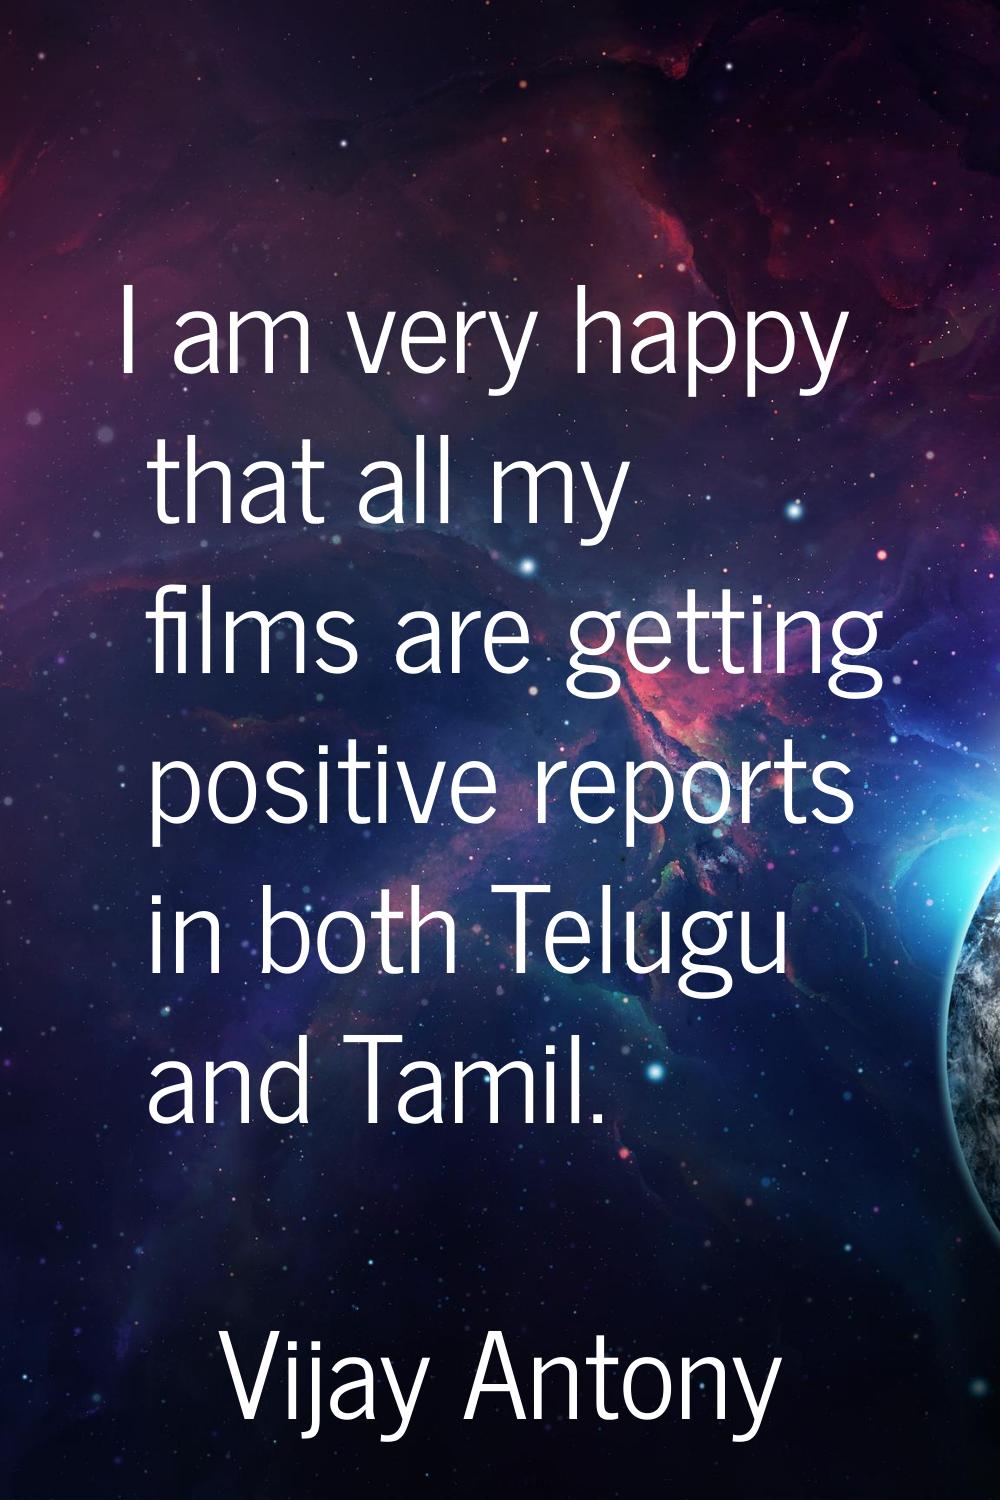 I am very happy that all my films are getting positive reports in both Telugu and Tamil.